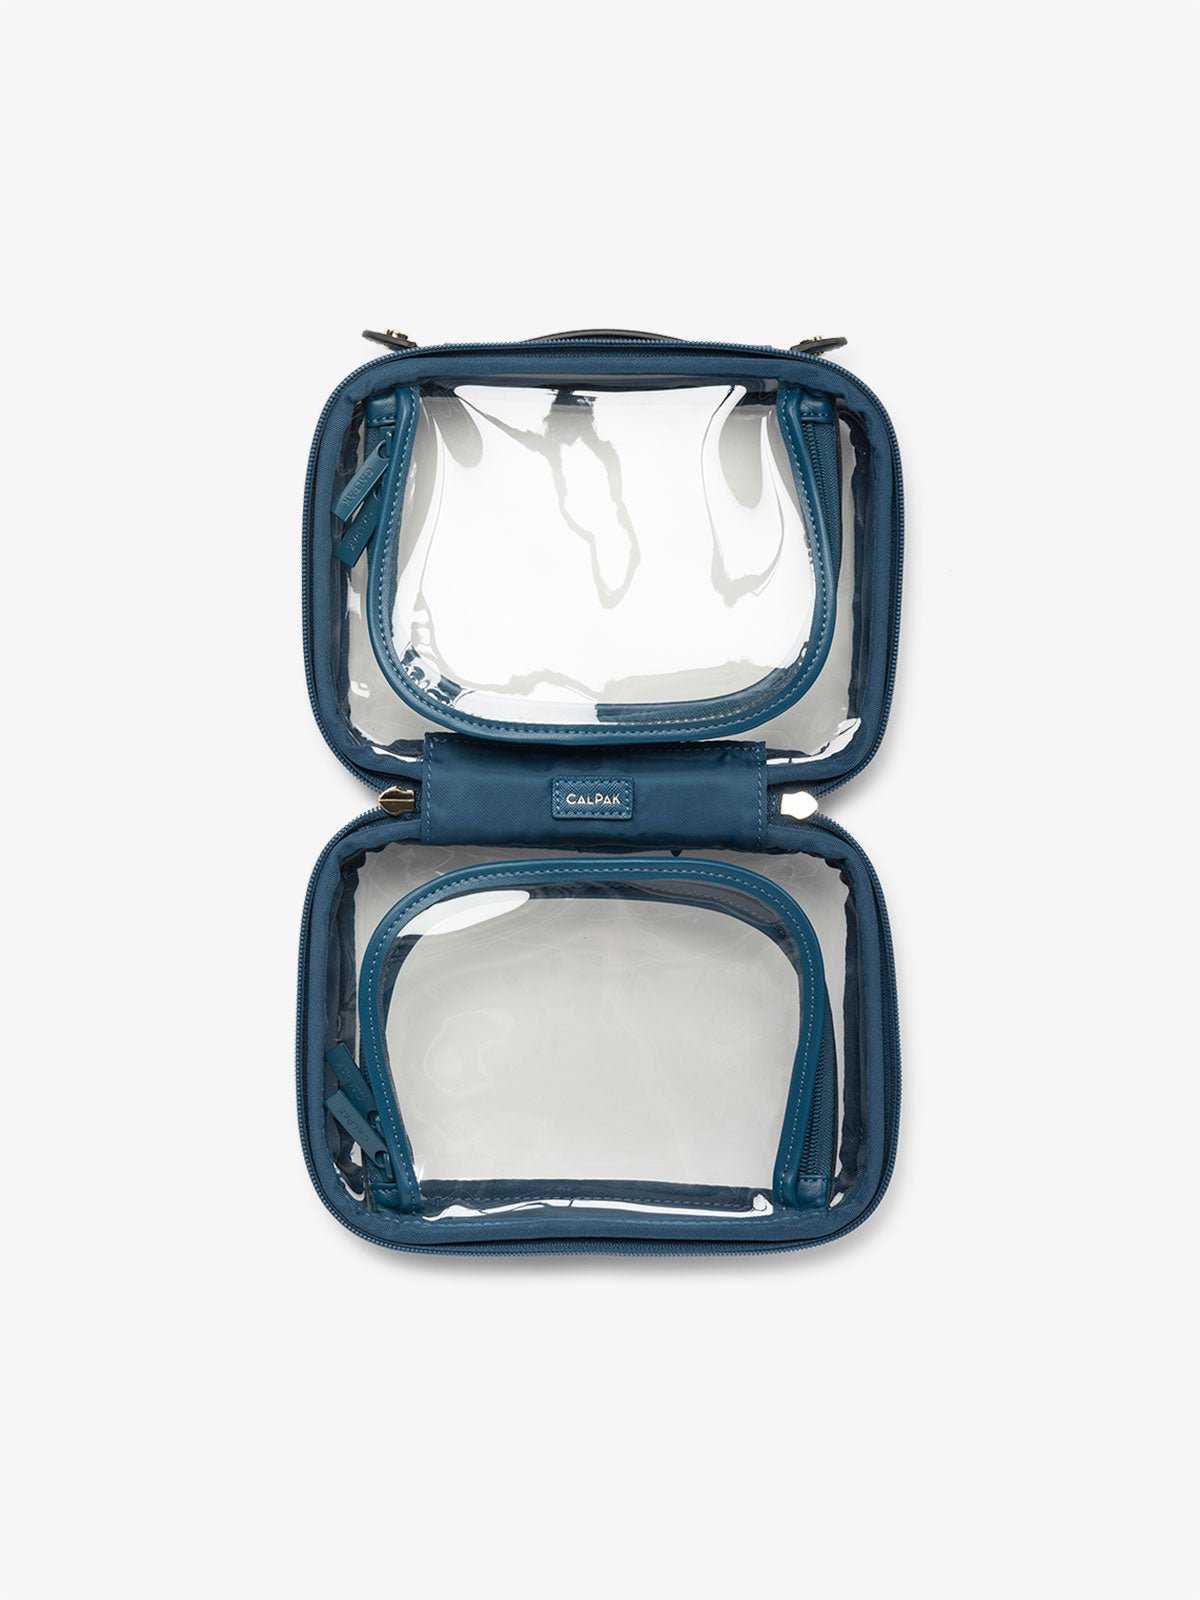 CALPAK small clear skincare bag with multiple zippered compartments in deep sea